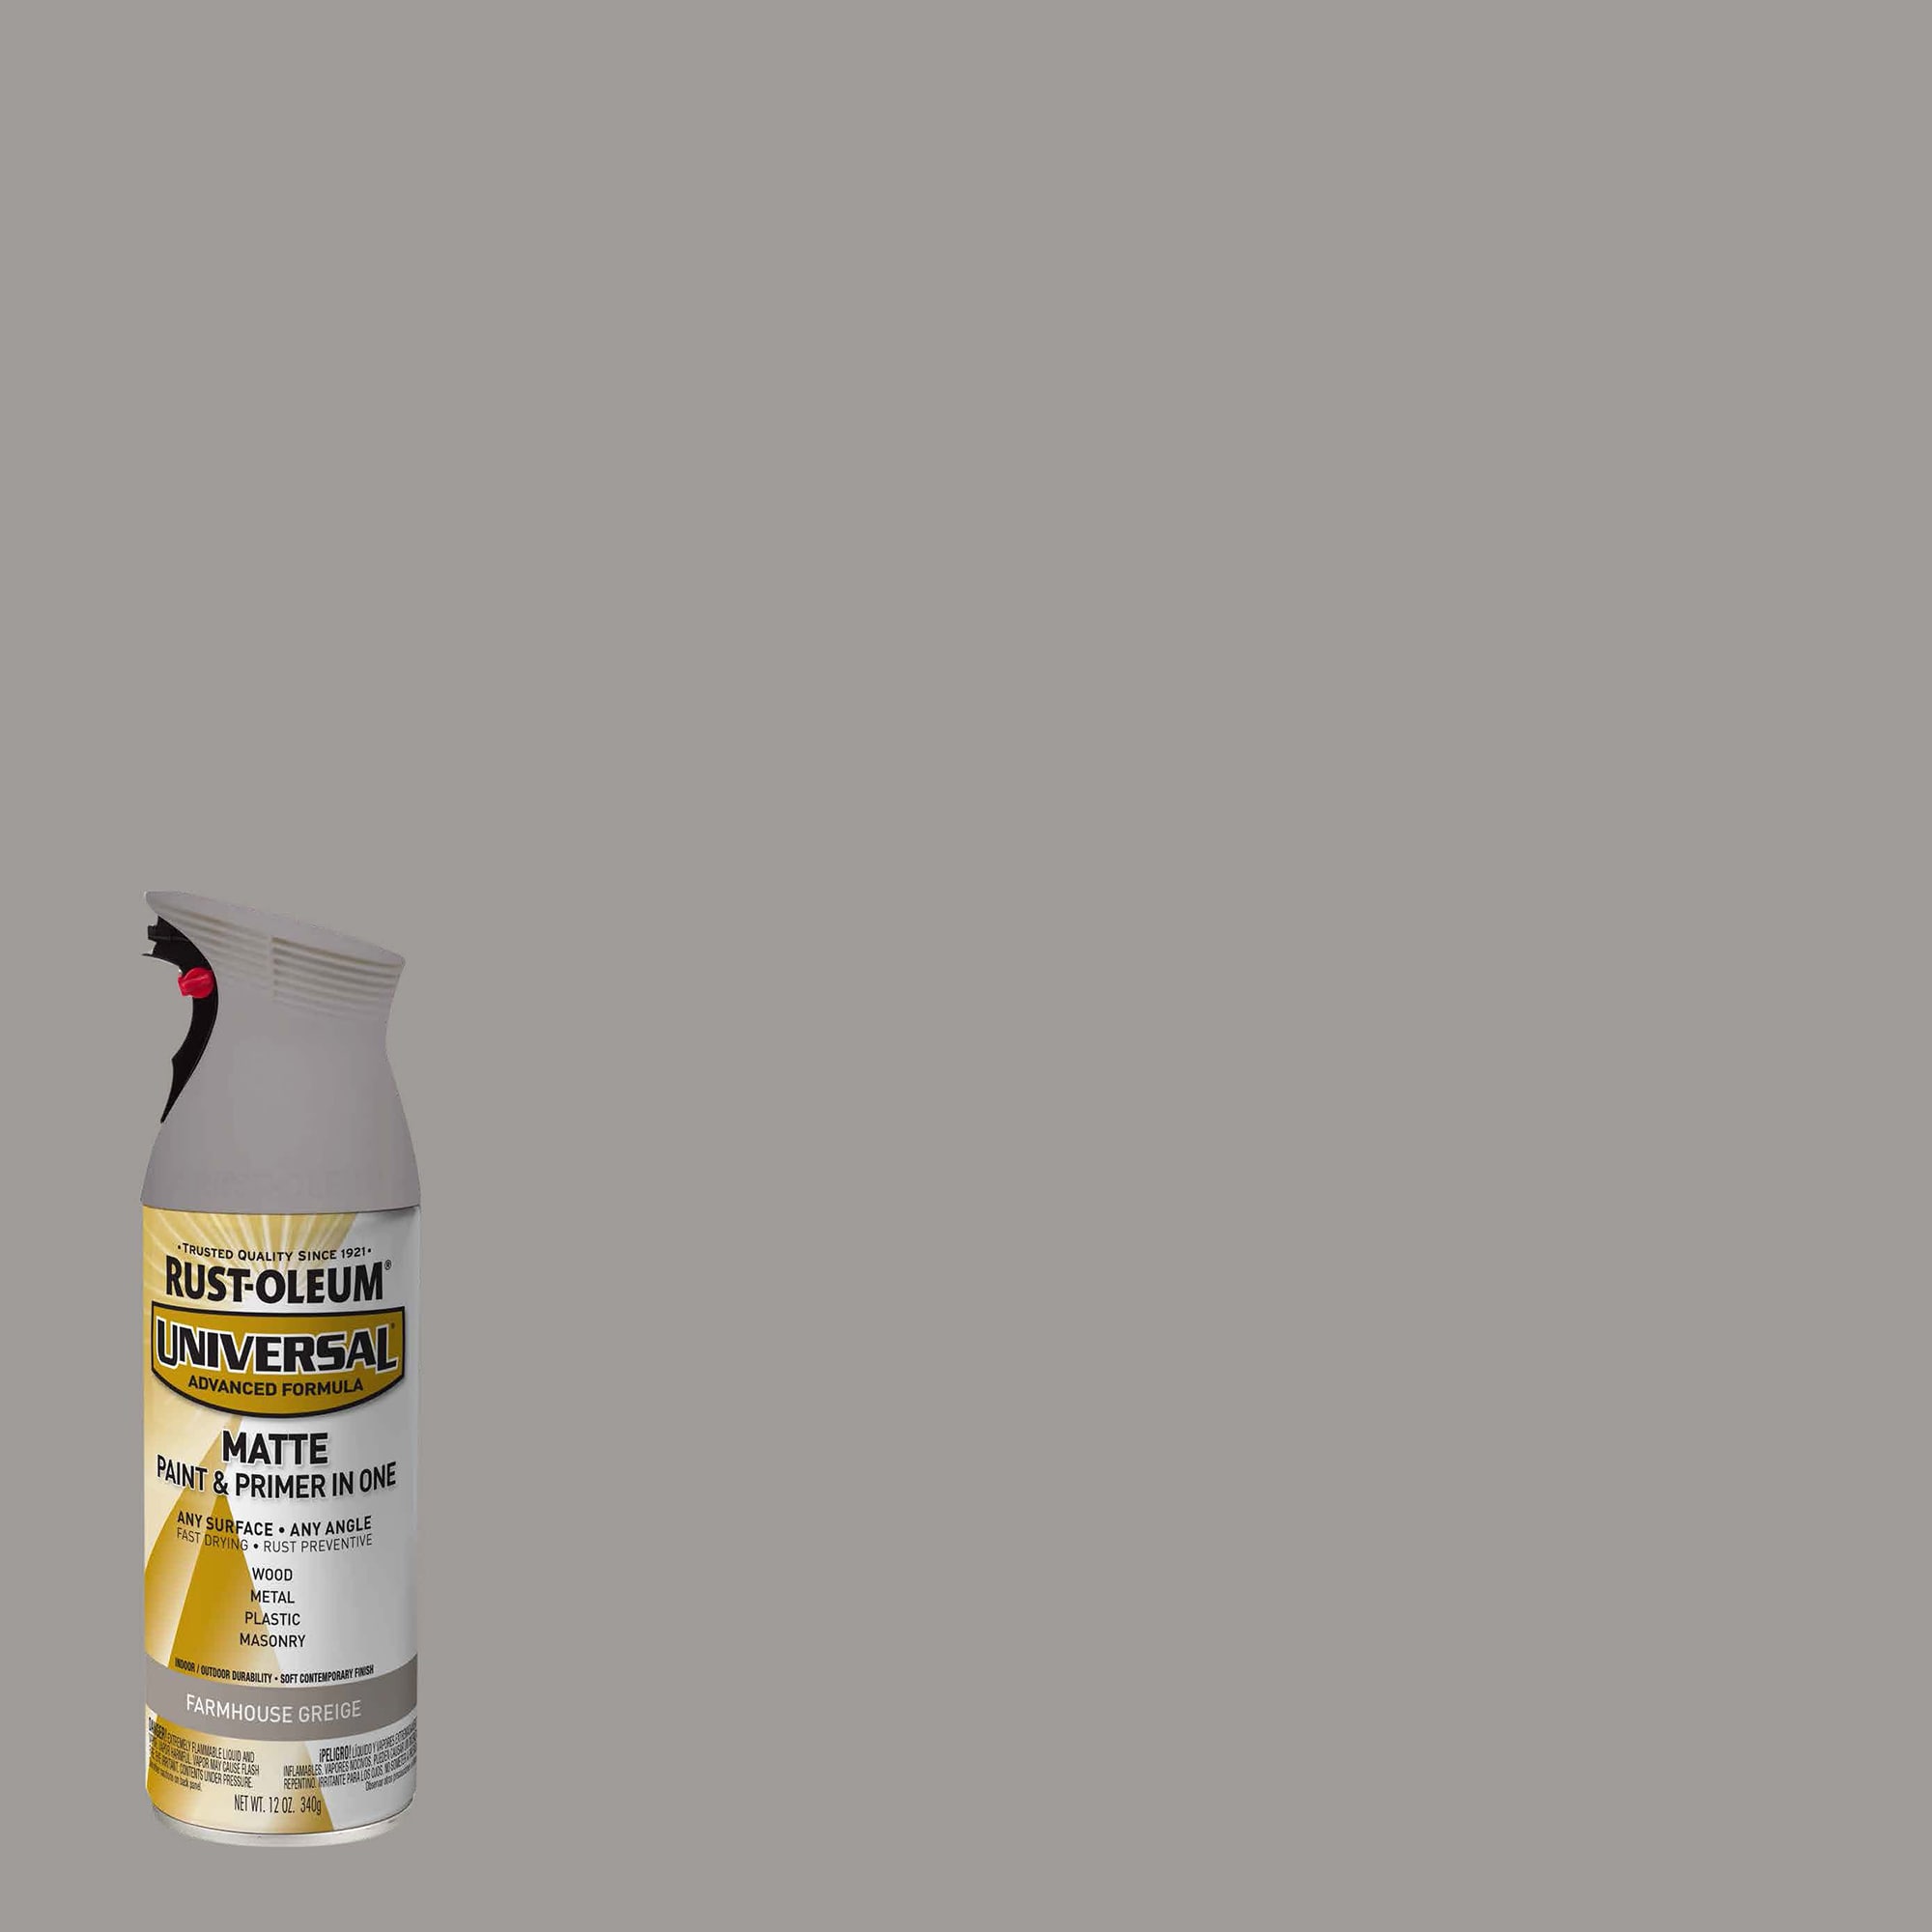 Rust-Oleum 1 gal. Pure White Simply Home Interior Wall Paint & Primer, Semi- Gloss at Tractor Supply Co.